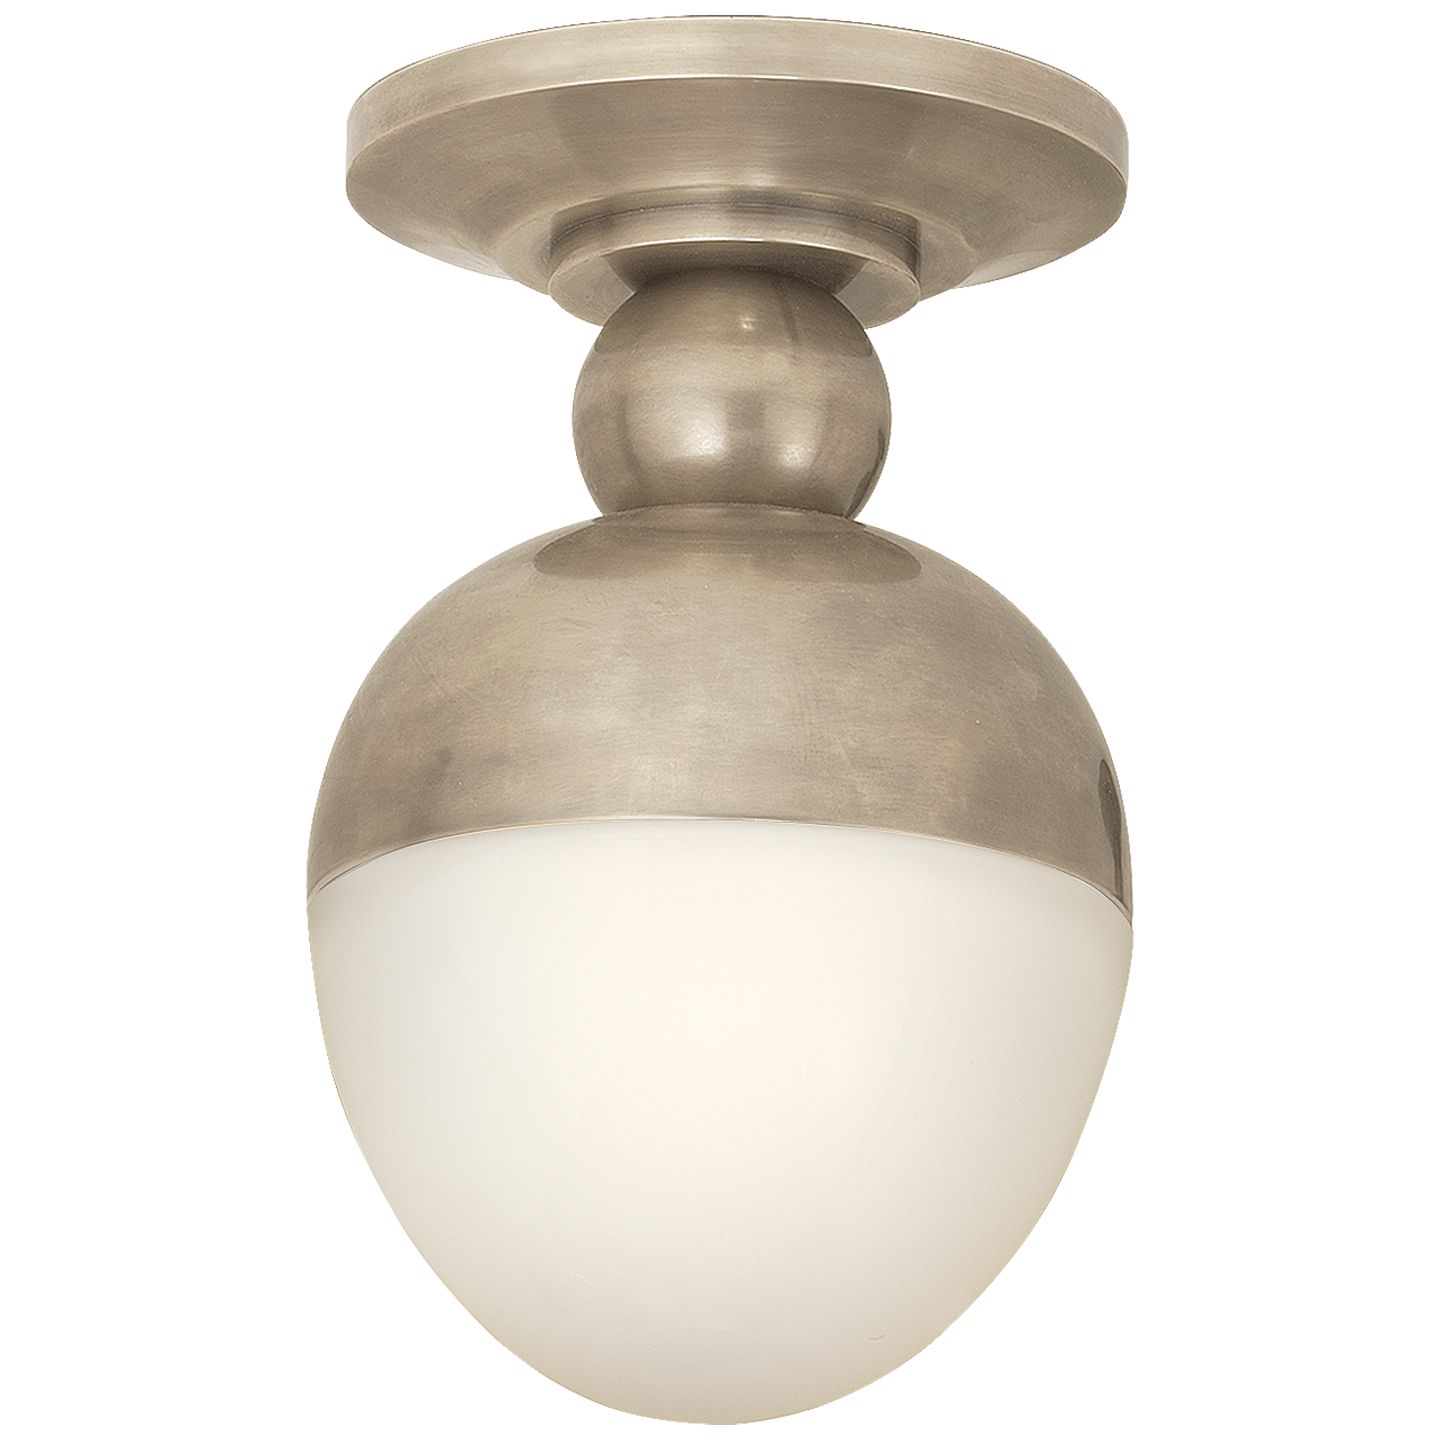 Clark Flush Mount in Antique Nickel with White Glass | Visual Comfort